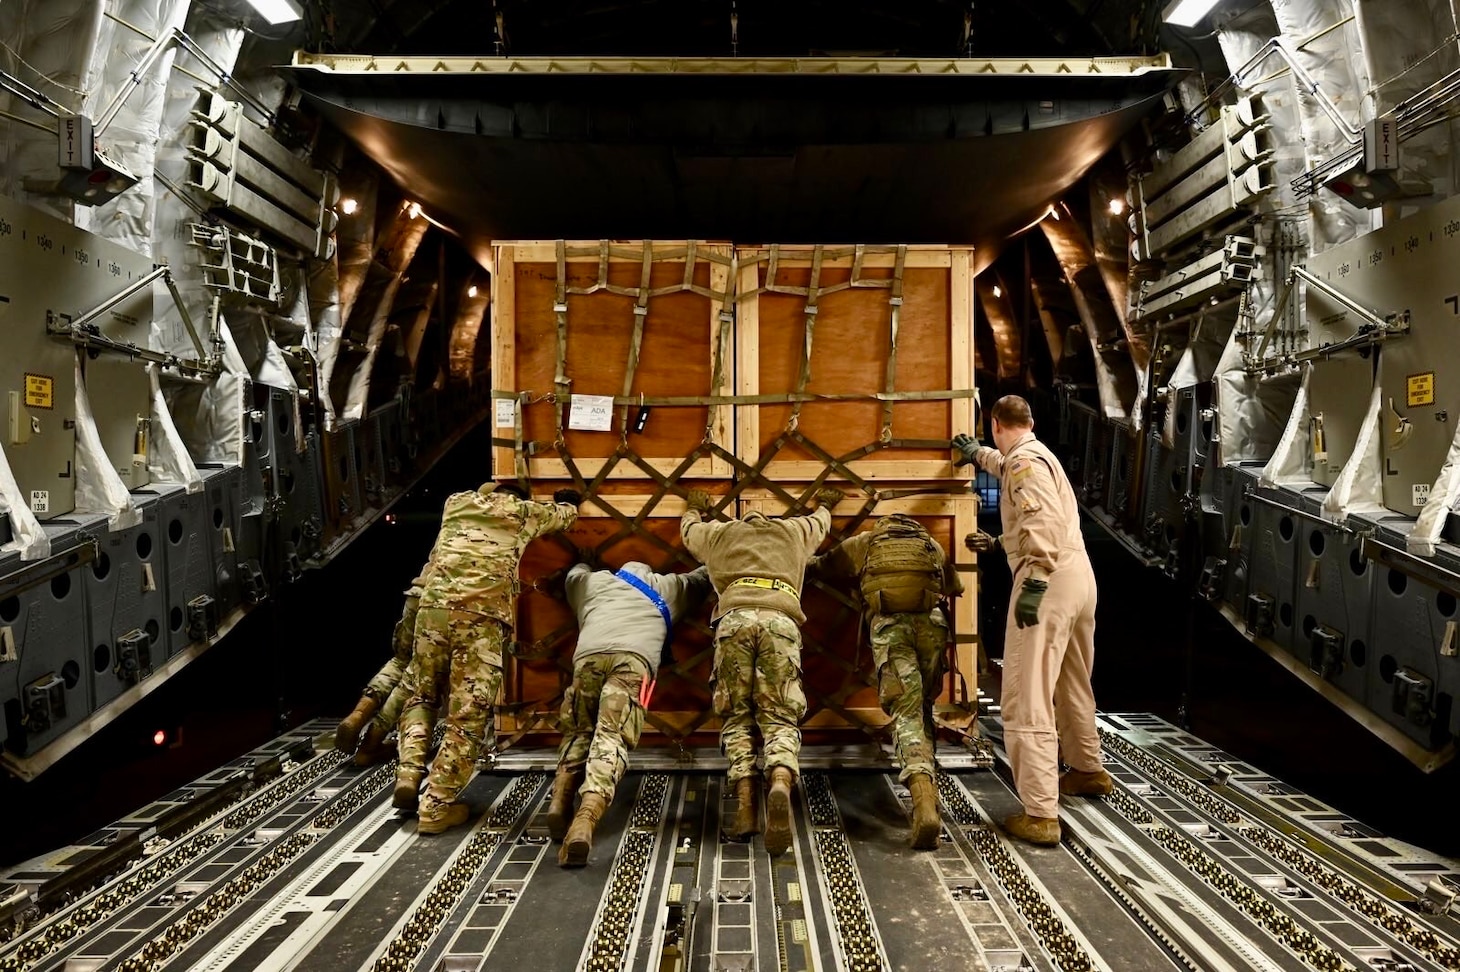 U.S. Air Force Airmen unload humanitarian aid supplies from a C-17 Globemaster III assigned to the 8 th Expeditionary Airlift Squadron, to provide international aid to Turkey at Incirlik Air Base, Turkey, Feb. 21, 2023. The 8 th EAS personnel airlifted 18 pallets containing tents and emergency supplies, providing humanitarian assistance in response to the devastating impacts in Turkey following the worst earthquake to hit the region in almost a century. (U.S. Air Force photo by Staff Sgt. Gerald R. Willis)